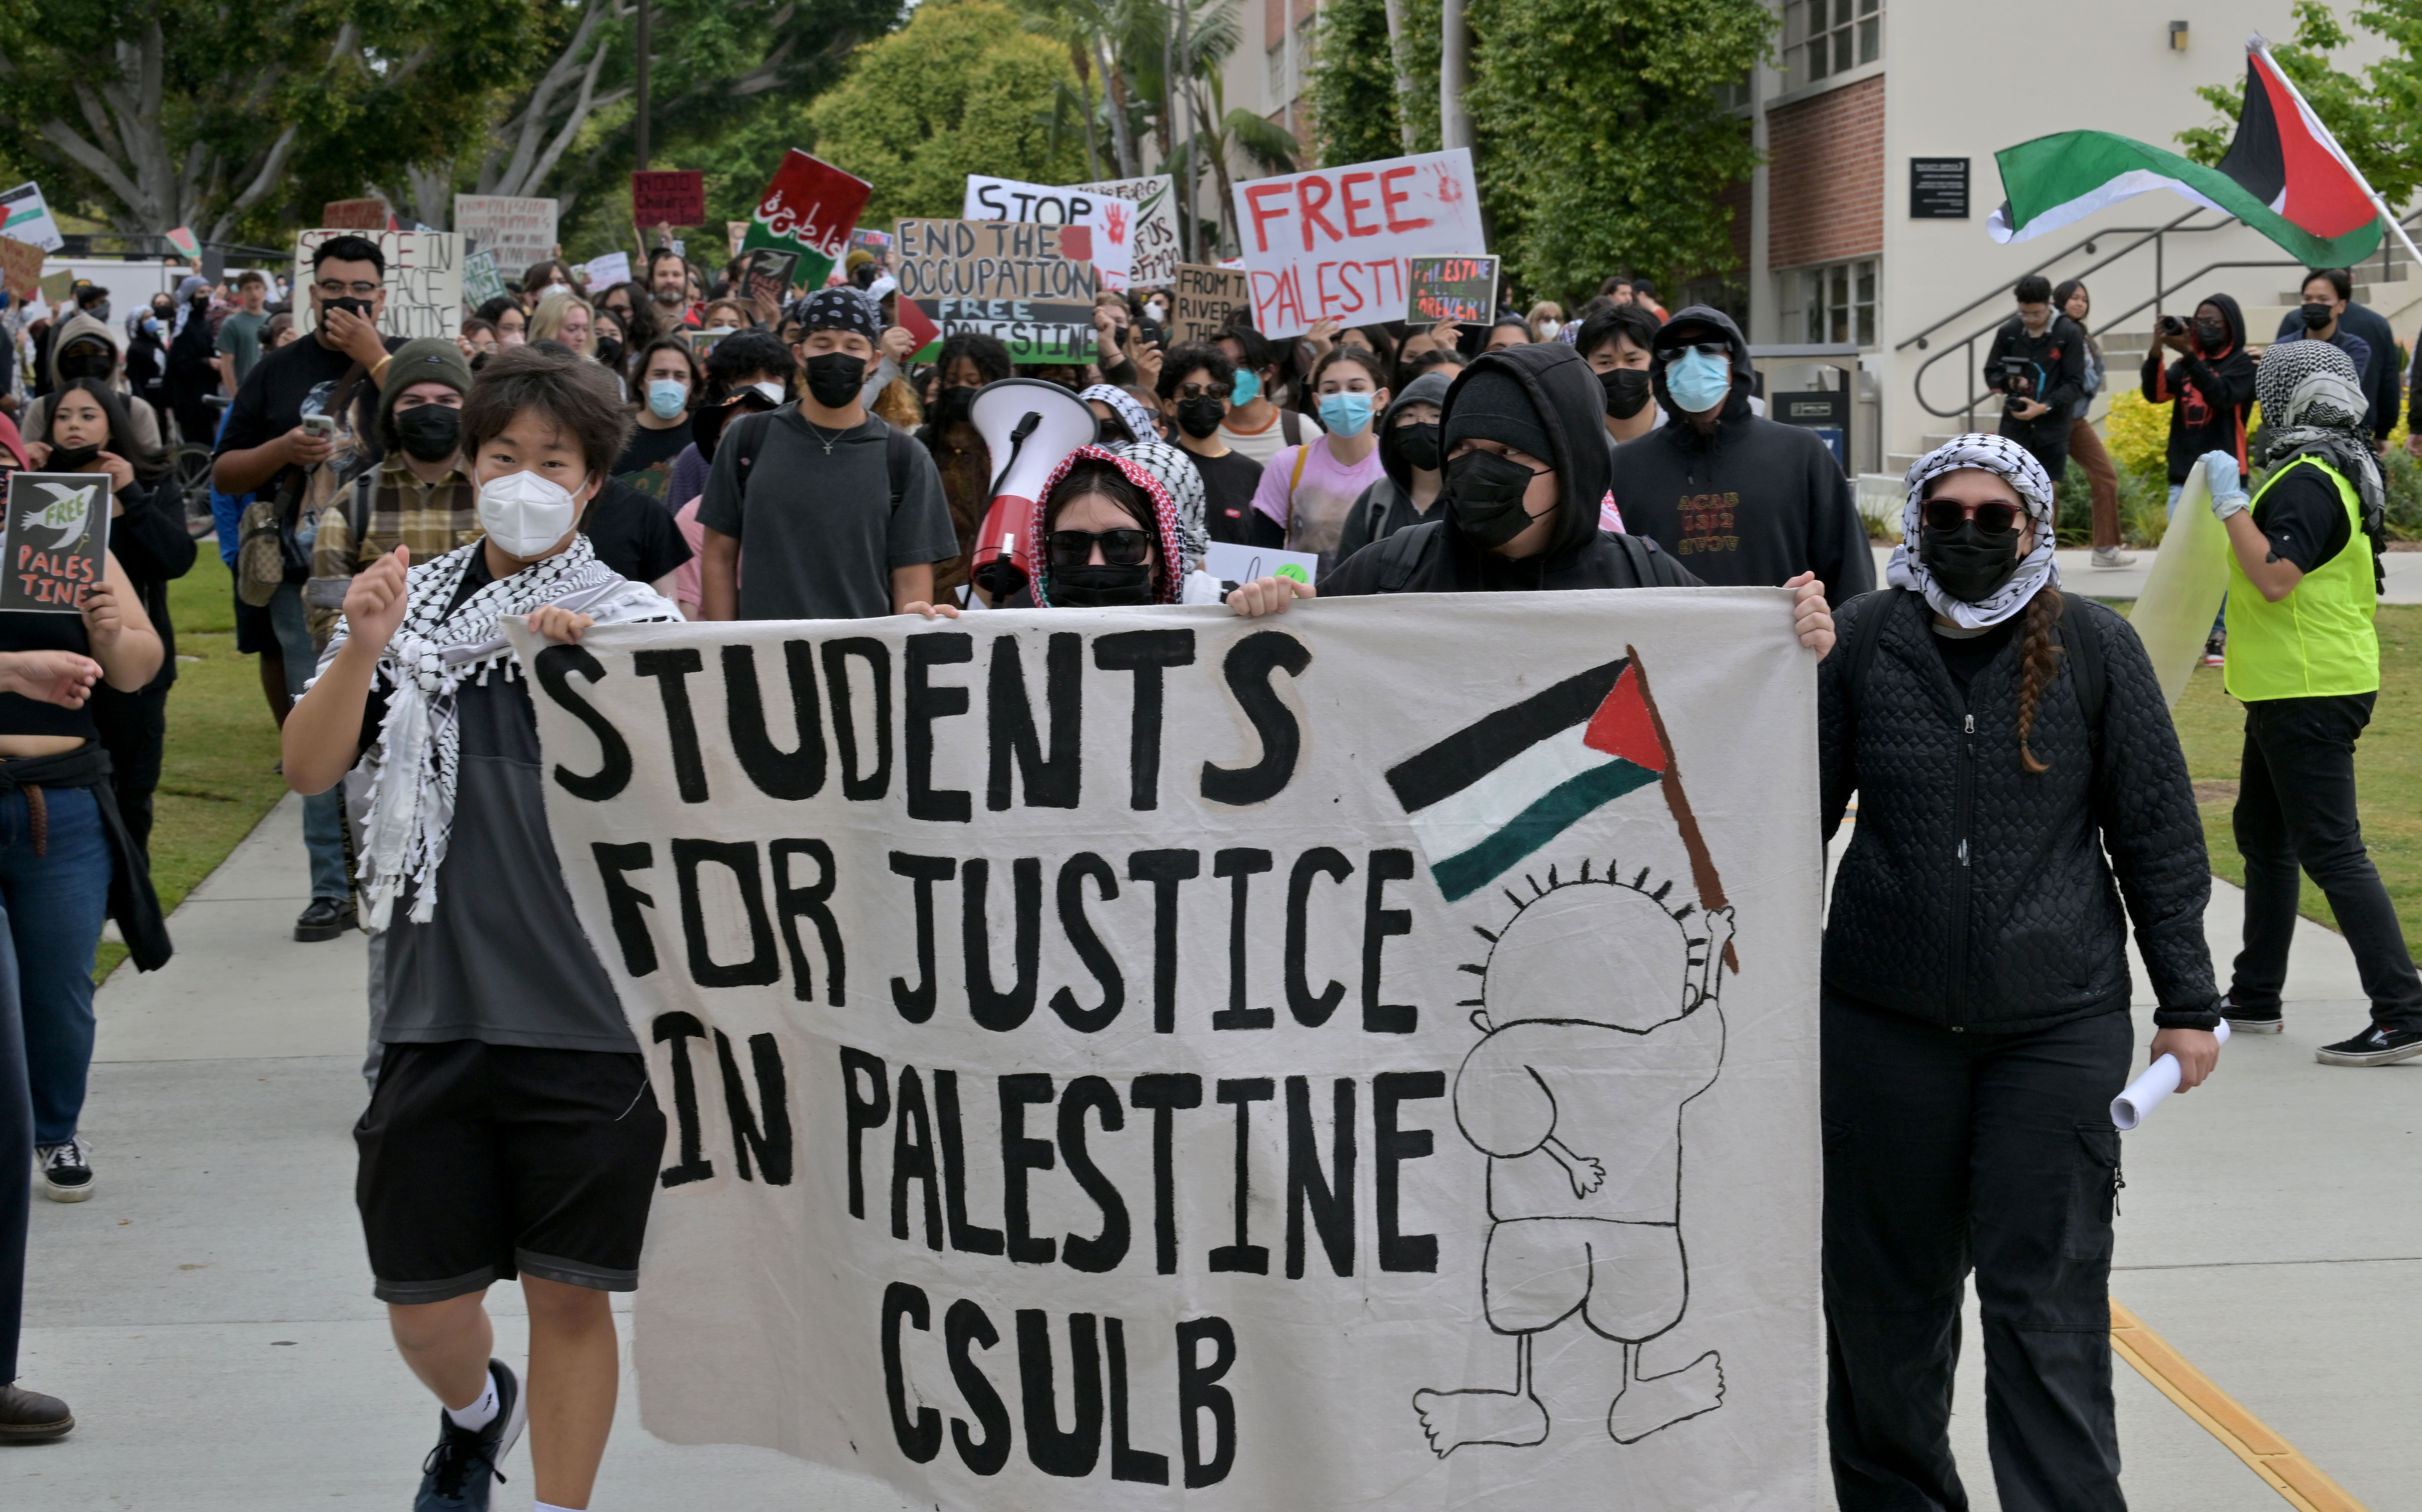 Students and faculty held a pro-Palestinian protest on campus at Cal State Long Beach.